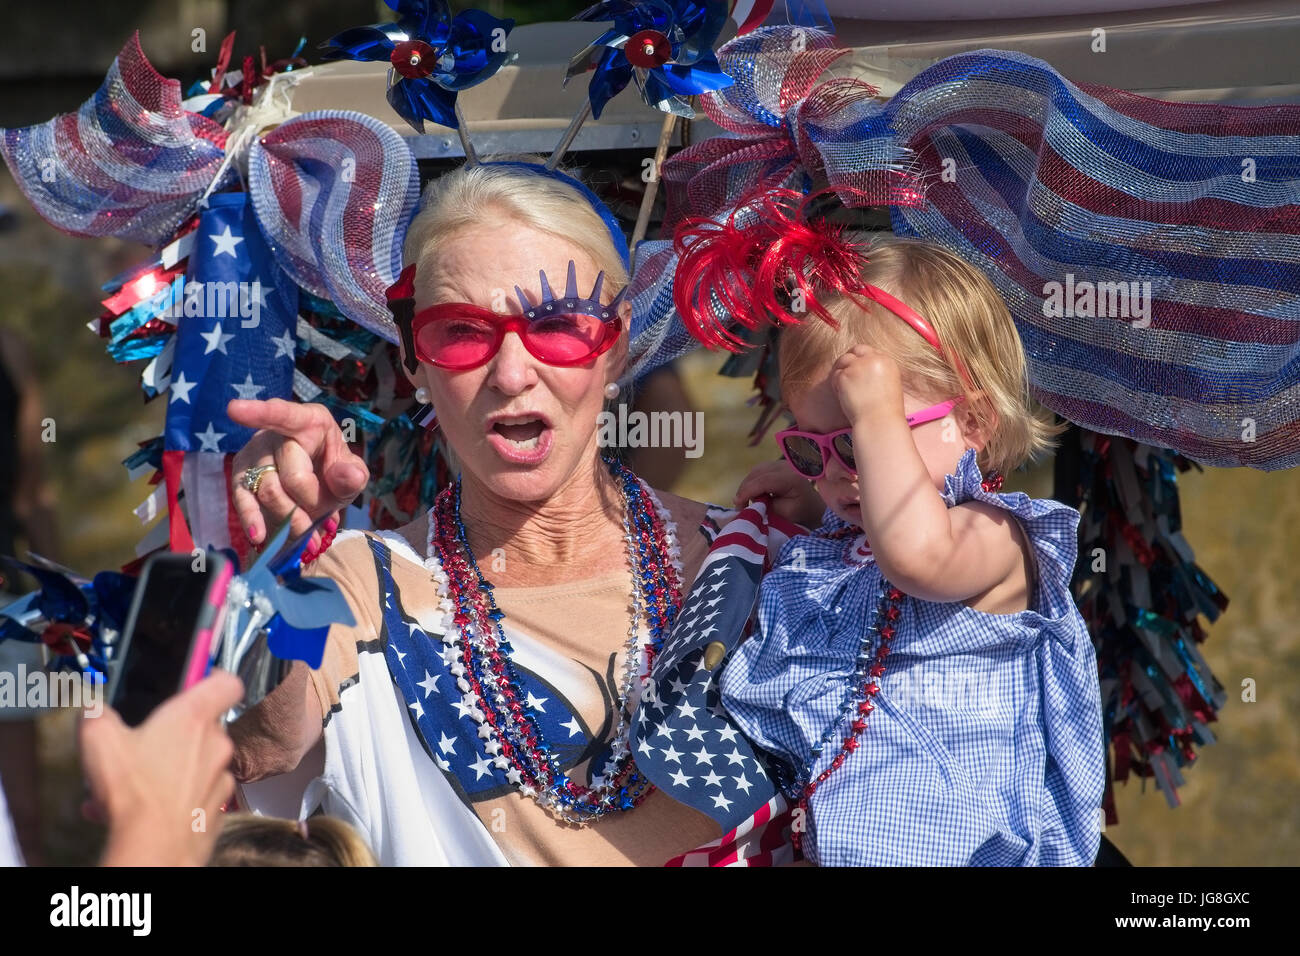 Sullivan's Island, South Carolina, USA. 4th July, 2017. A grandmother holds her young granddaughter during the annual Sullivan's Island Independence Day parade July 4, 2017 in Sullivan's Island, South Carolina. The tiny affluent sea island hosts a bicycle and golf cart parade through the historic village. Credit: Planetpix/Alamy Live News Stock Photo